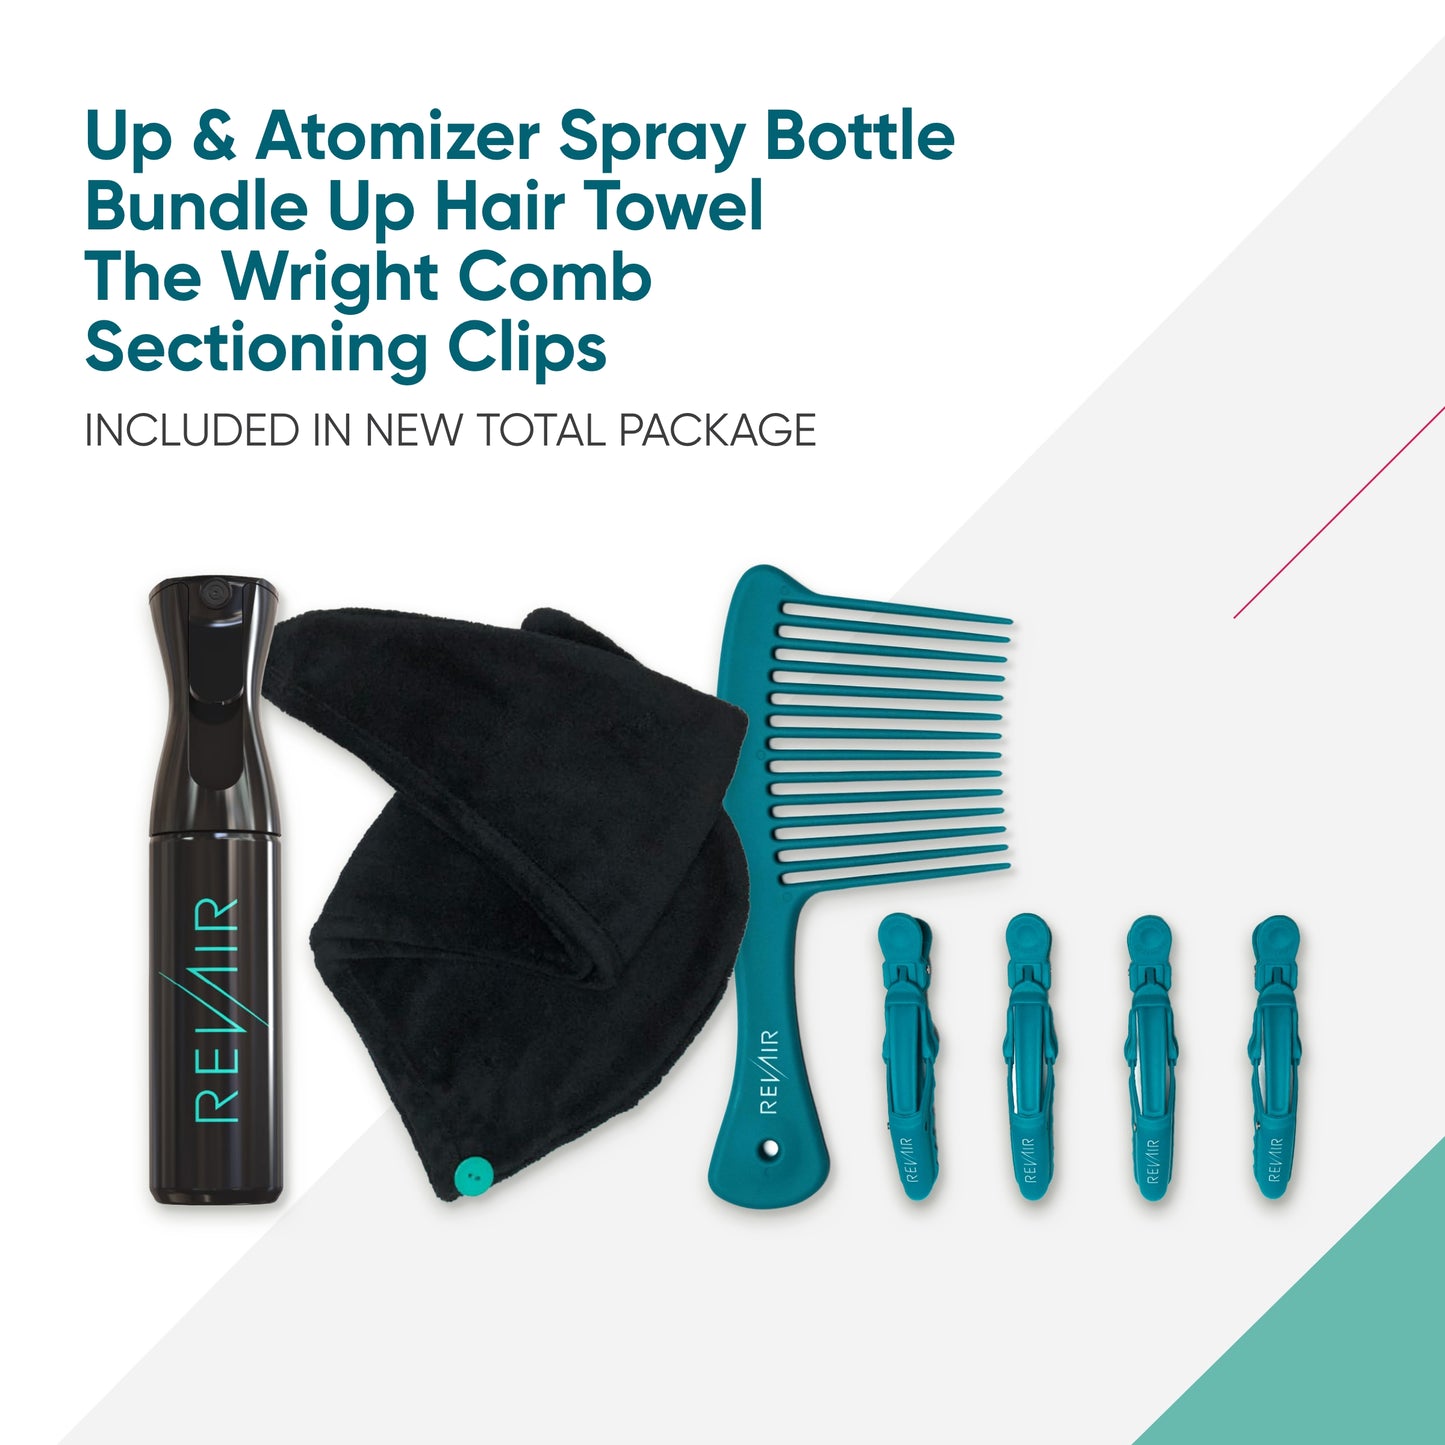 Spray Bottle, Bundle up hair towel, the Wright Comb, Sectioning Clips, included in the Total Package